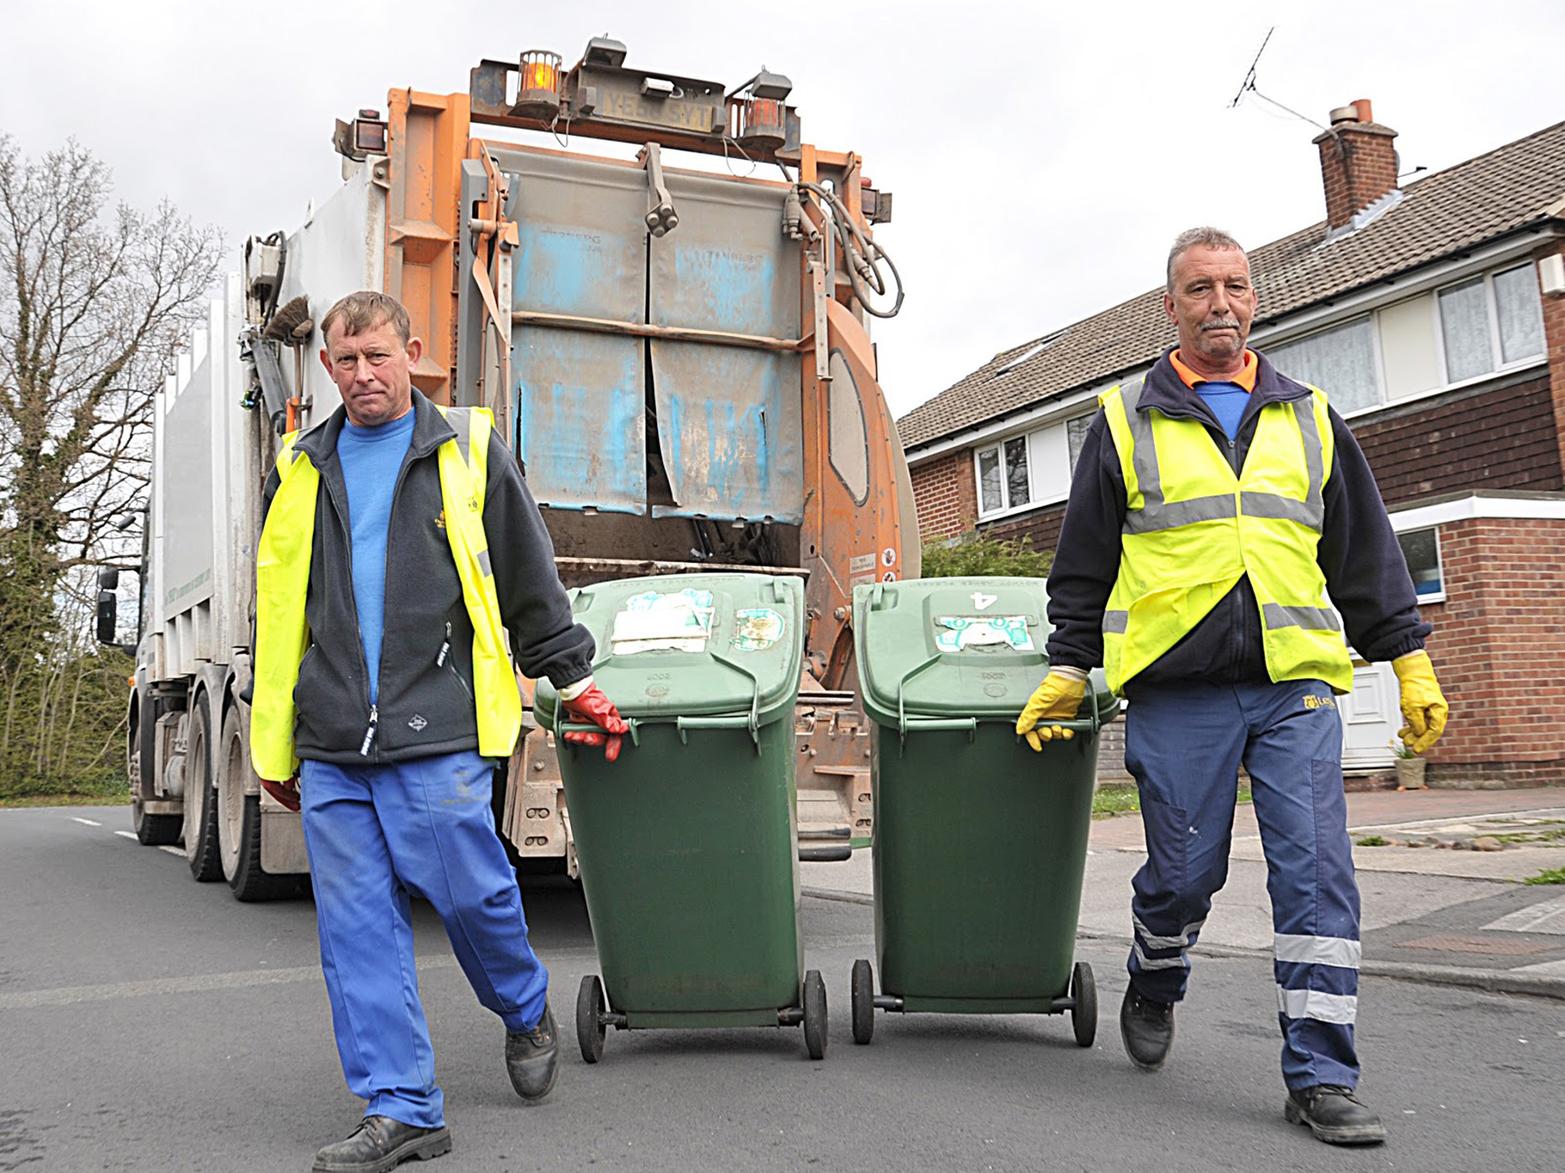 Only three quarters of what gets thrown in your green bins ends up being recycled